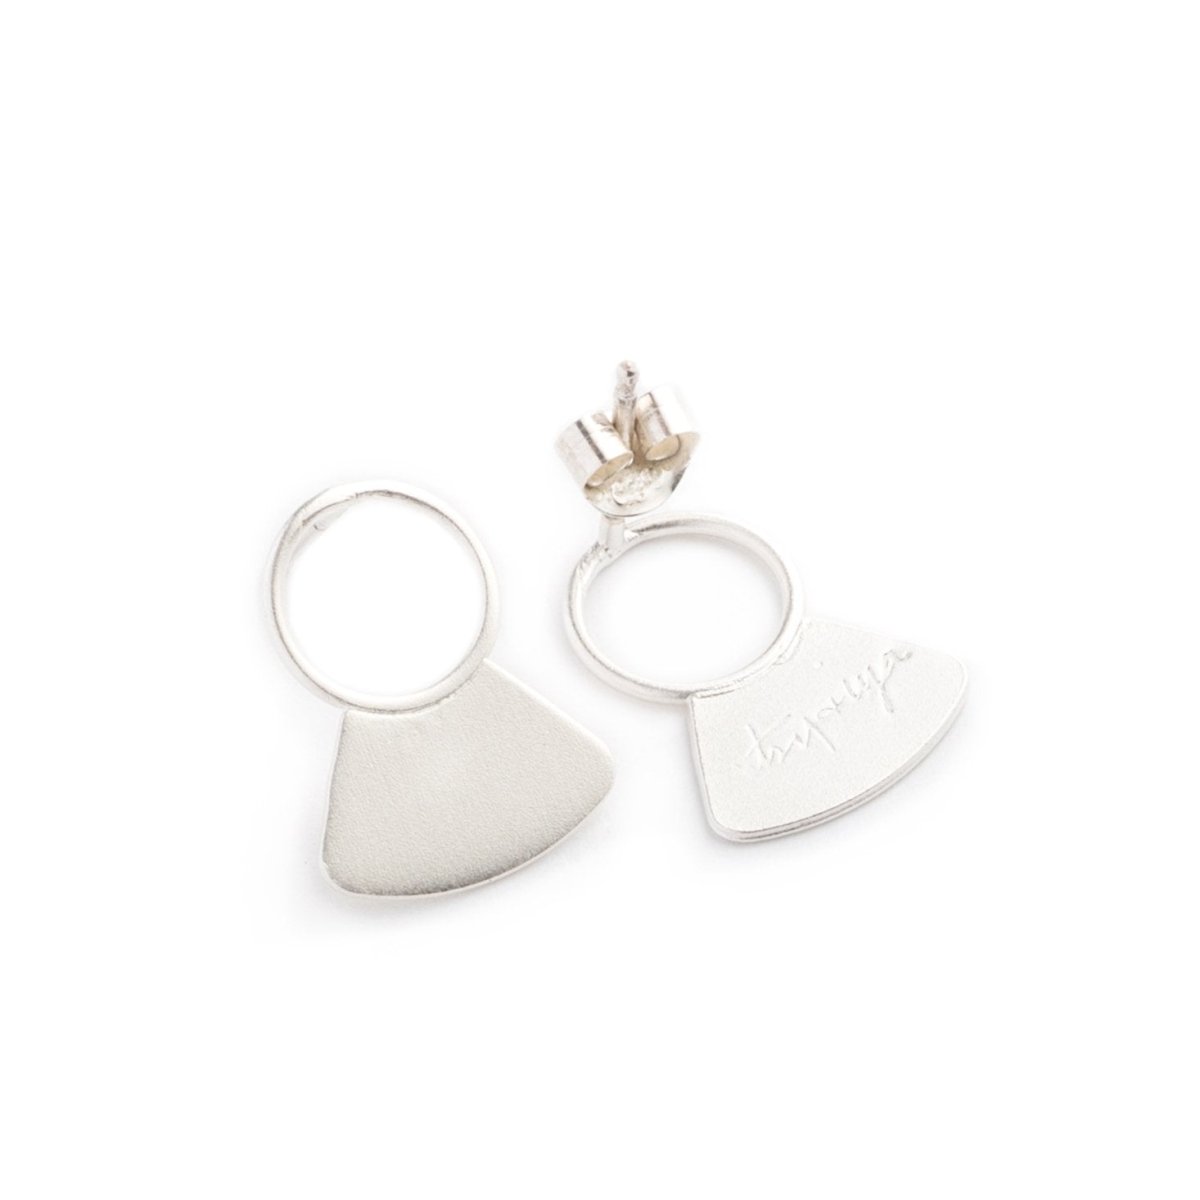 Small, sterling silver studs, featuring a delicate, open circle with a solid fan shape at the base, sterling silver earring posts and backings, and the betsy & iya logo etched on the back of the studs. Hand-crafted in Portland, Oregon.